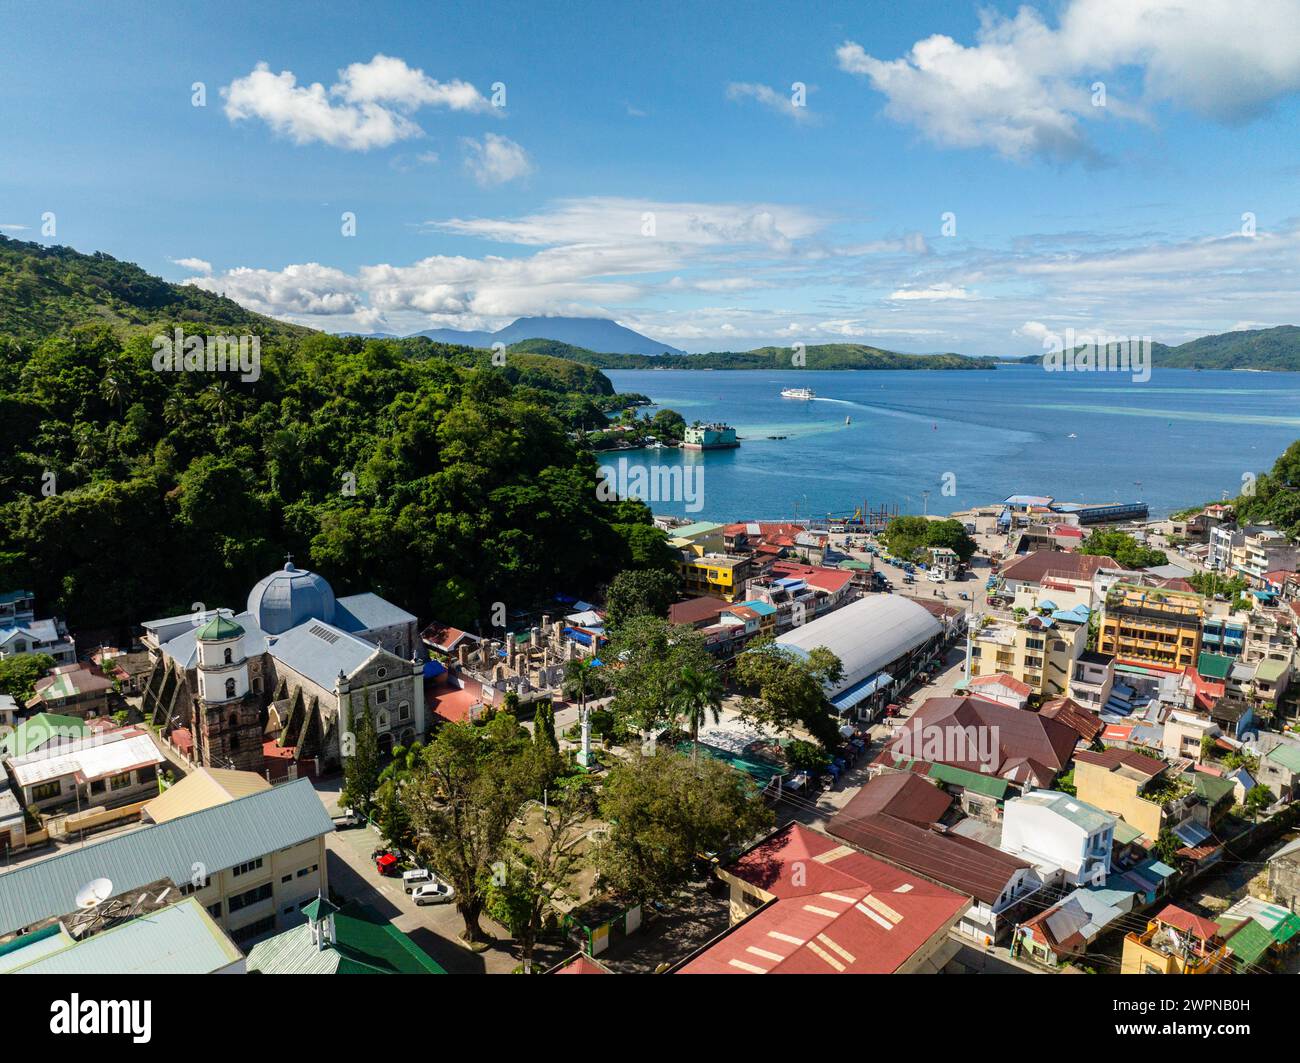 Aerial view of commercial buildings and streets in Romblon Island. Ferry over the blue sea. . Romblon, Philippines. Stock Photo